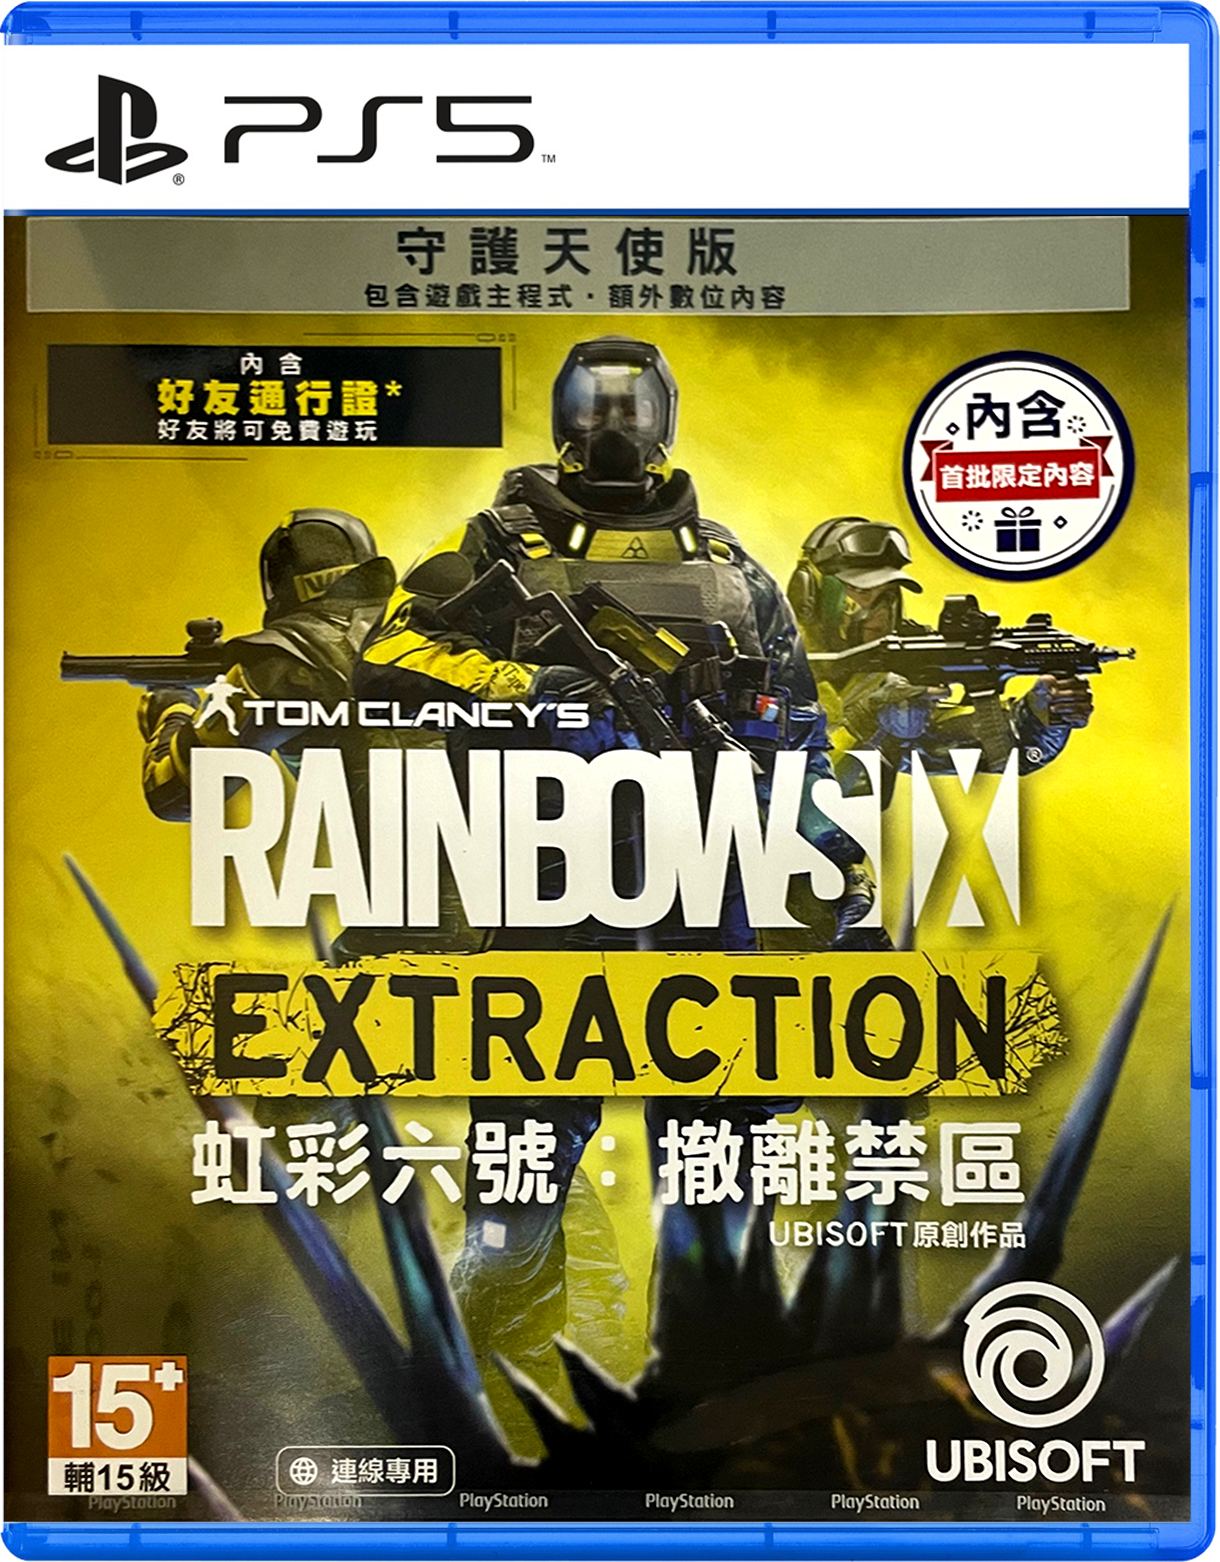 Tom Clancy\'s Rainbow PlayStation Extraction [Guardian 5 Six Edition] (English) for